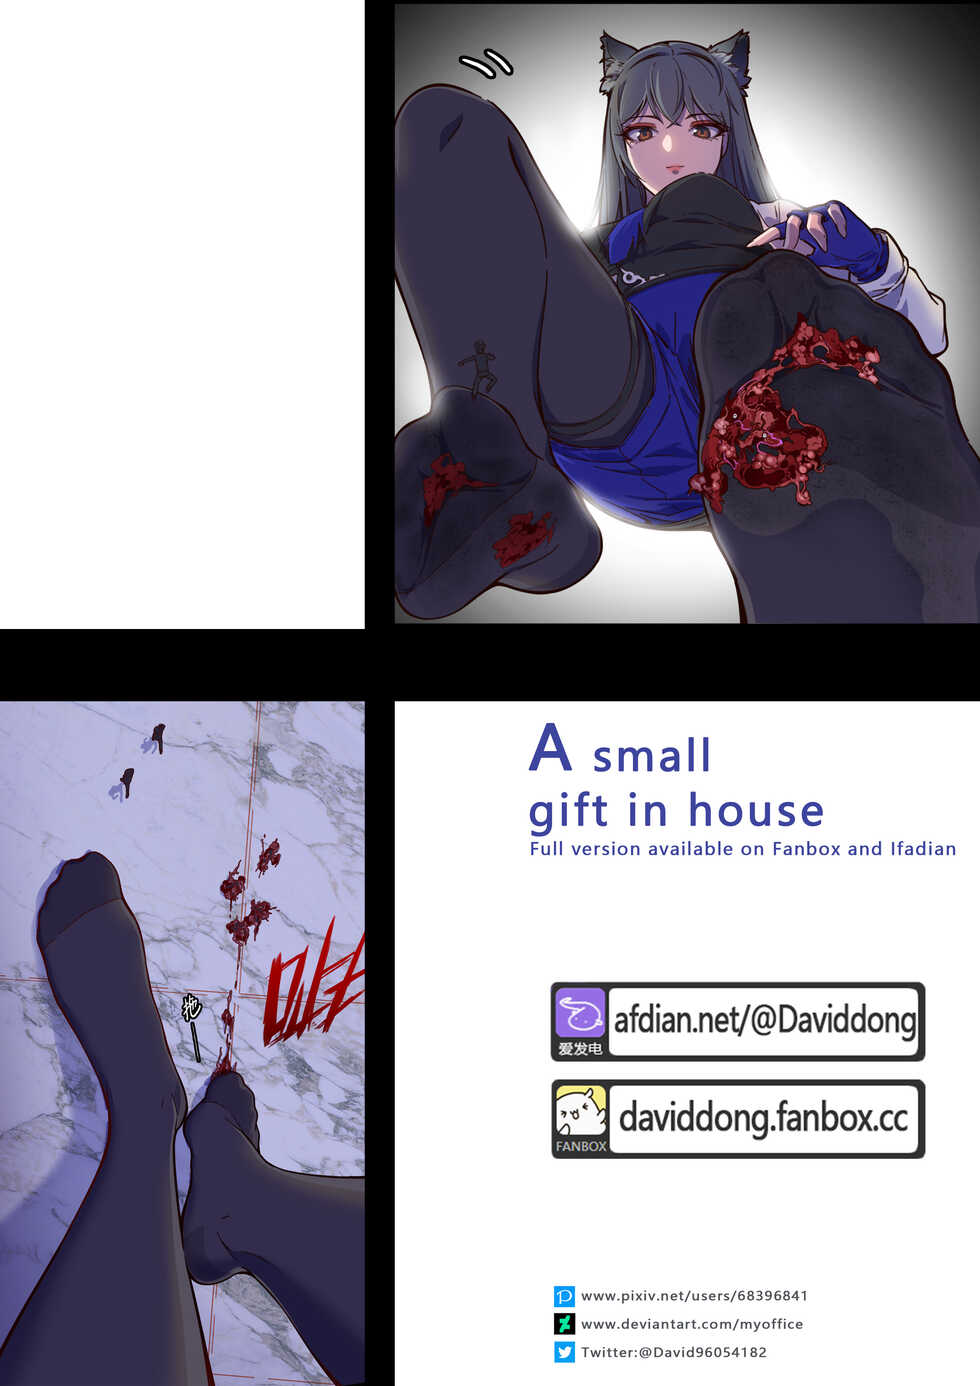 [DavidDong] - A small gift in house - Page 1